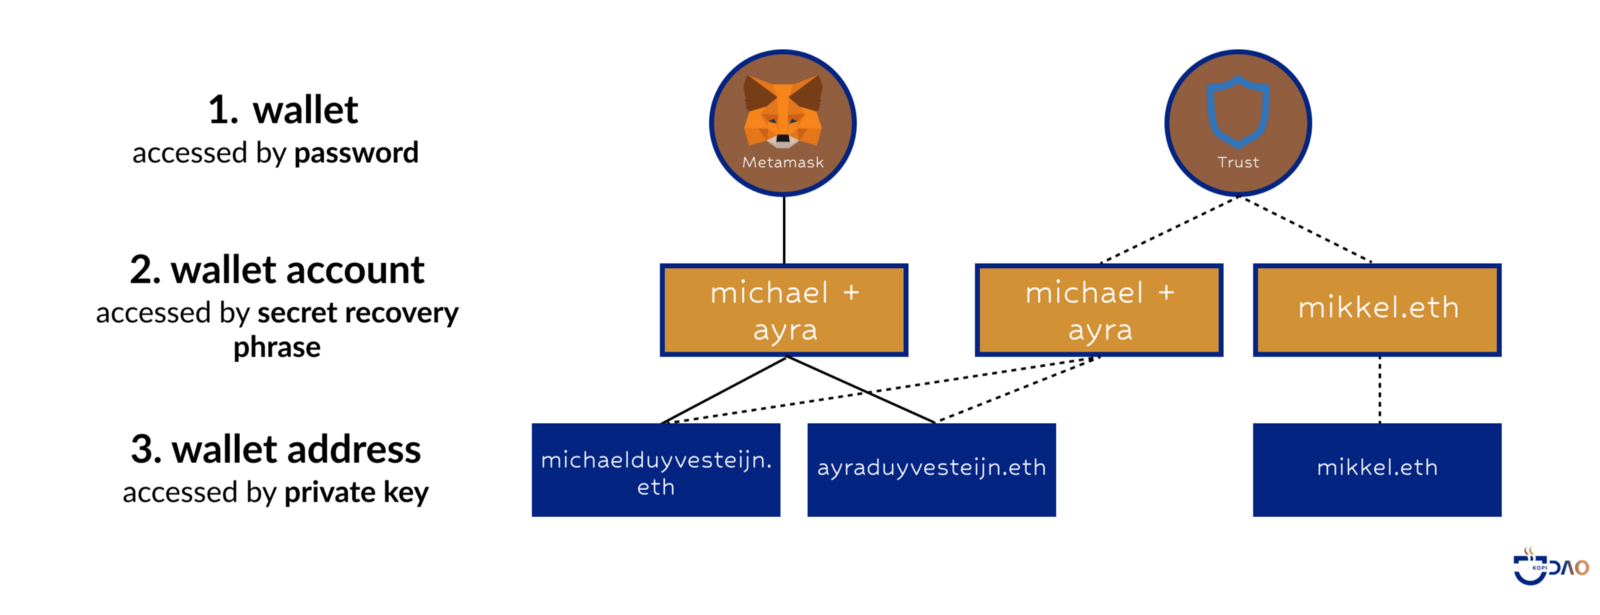 This is how my 2 different wallets are set up. Metamask only has 1 wallet account associated with it, containing 2 wallet addresses: michaelduyvesteijn.eth and ayraduyvesteijn.eth (my daughter’s 😏). Trust Wallet, however, can have 2 wallet accounts set up, which is a different design decision they made. Note that michael + ayra in Trust wallet refers to the exact same wallet addresses that Metamask does. Also, note that both wallet accounts under Trust Wallet have different secret recovery phrases (they’re not the same).